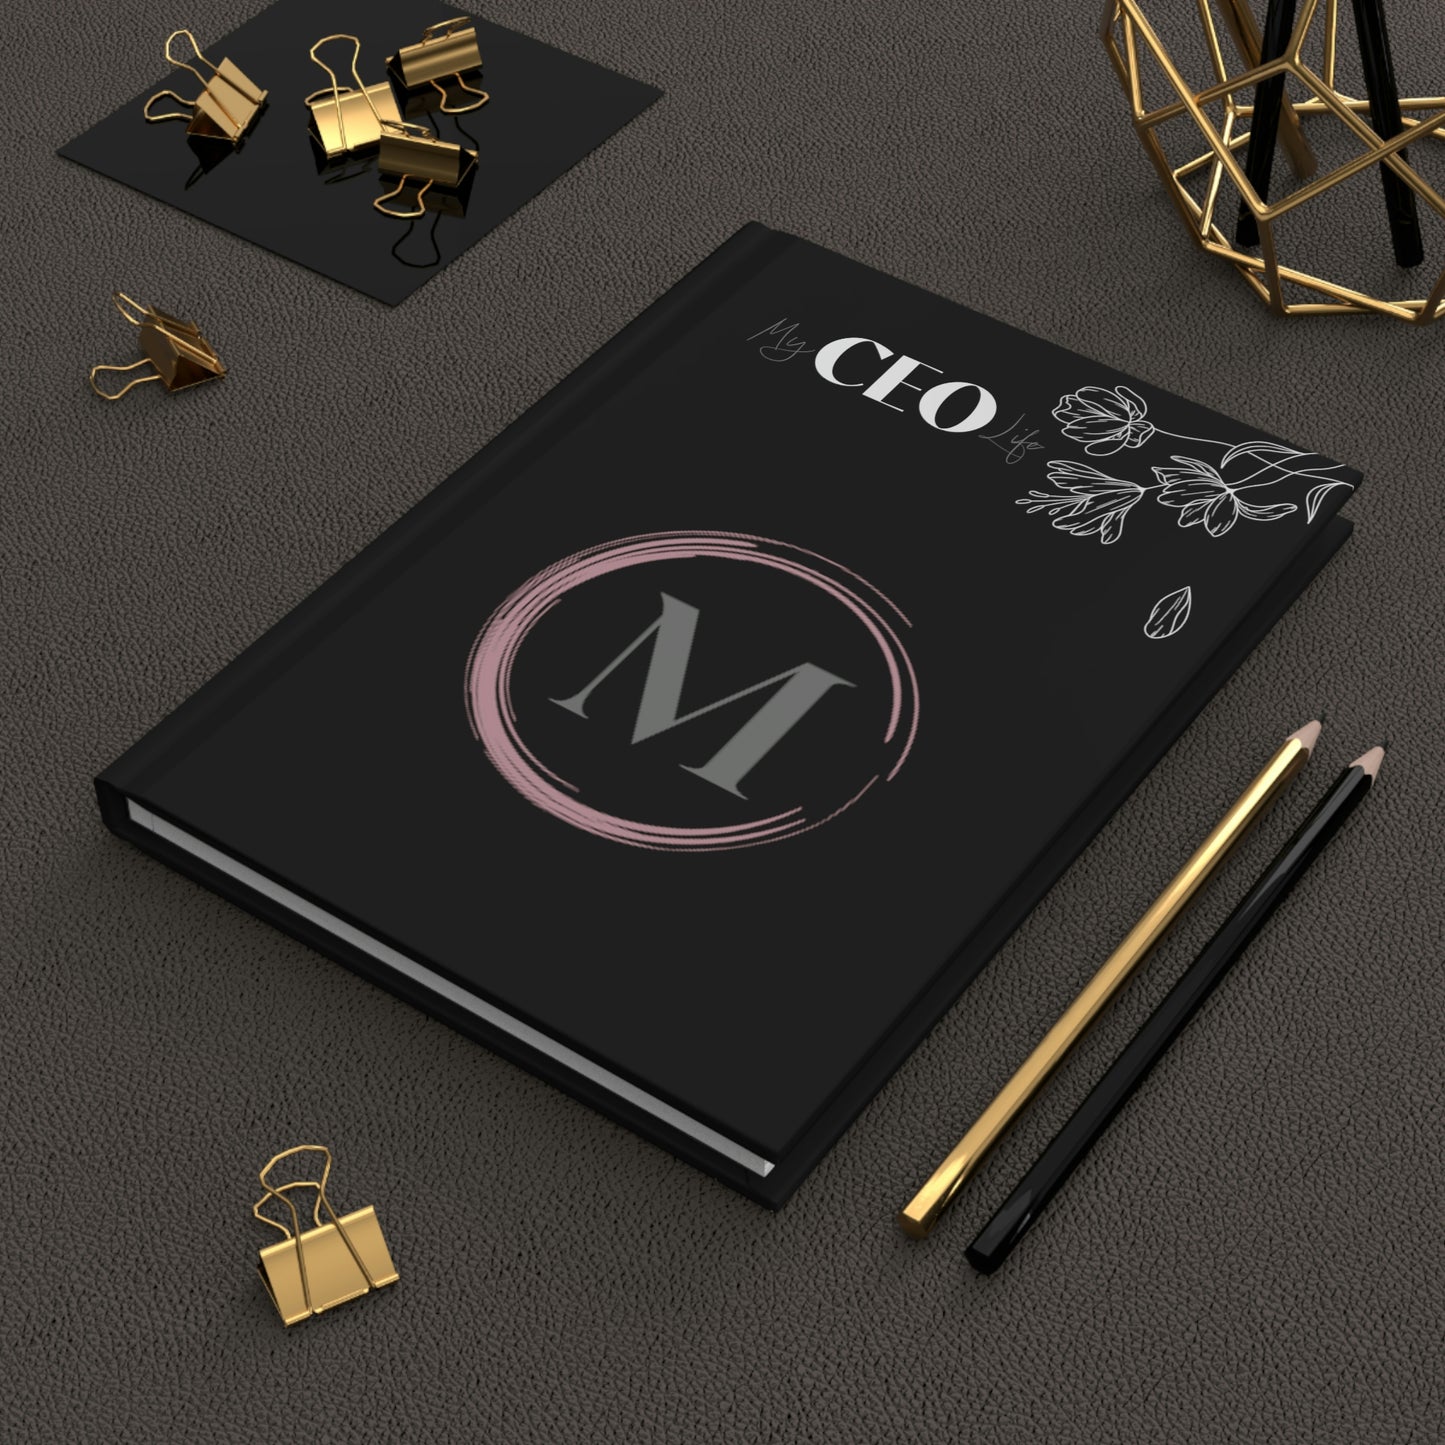 My CEO Life - Hardcover Lined Journal - Monogram - M